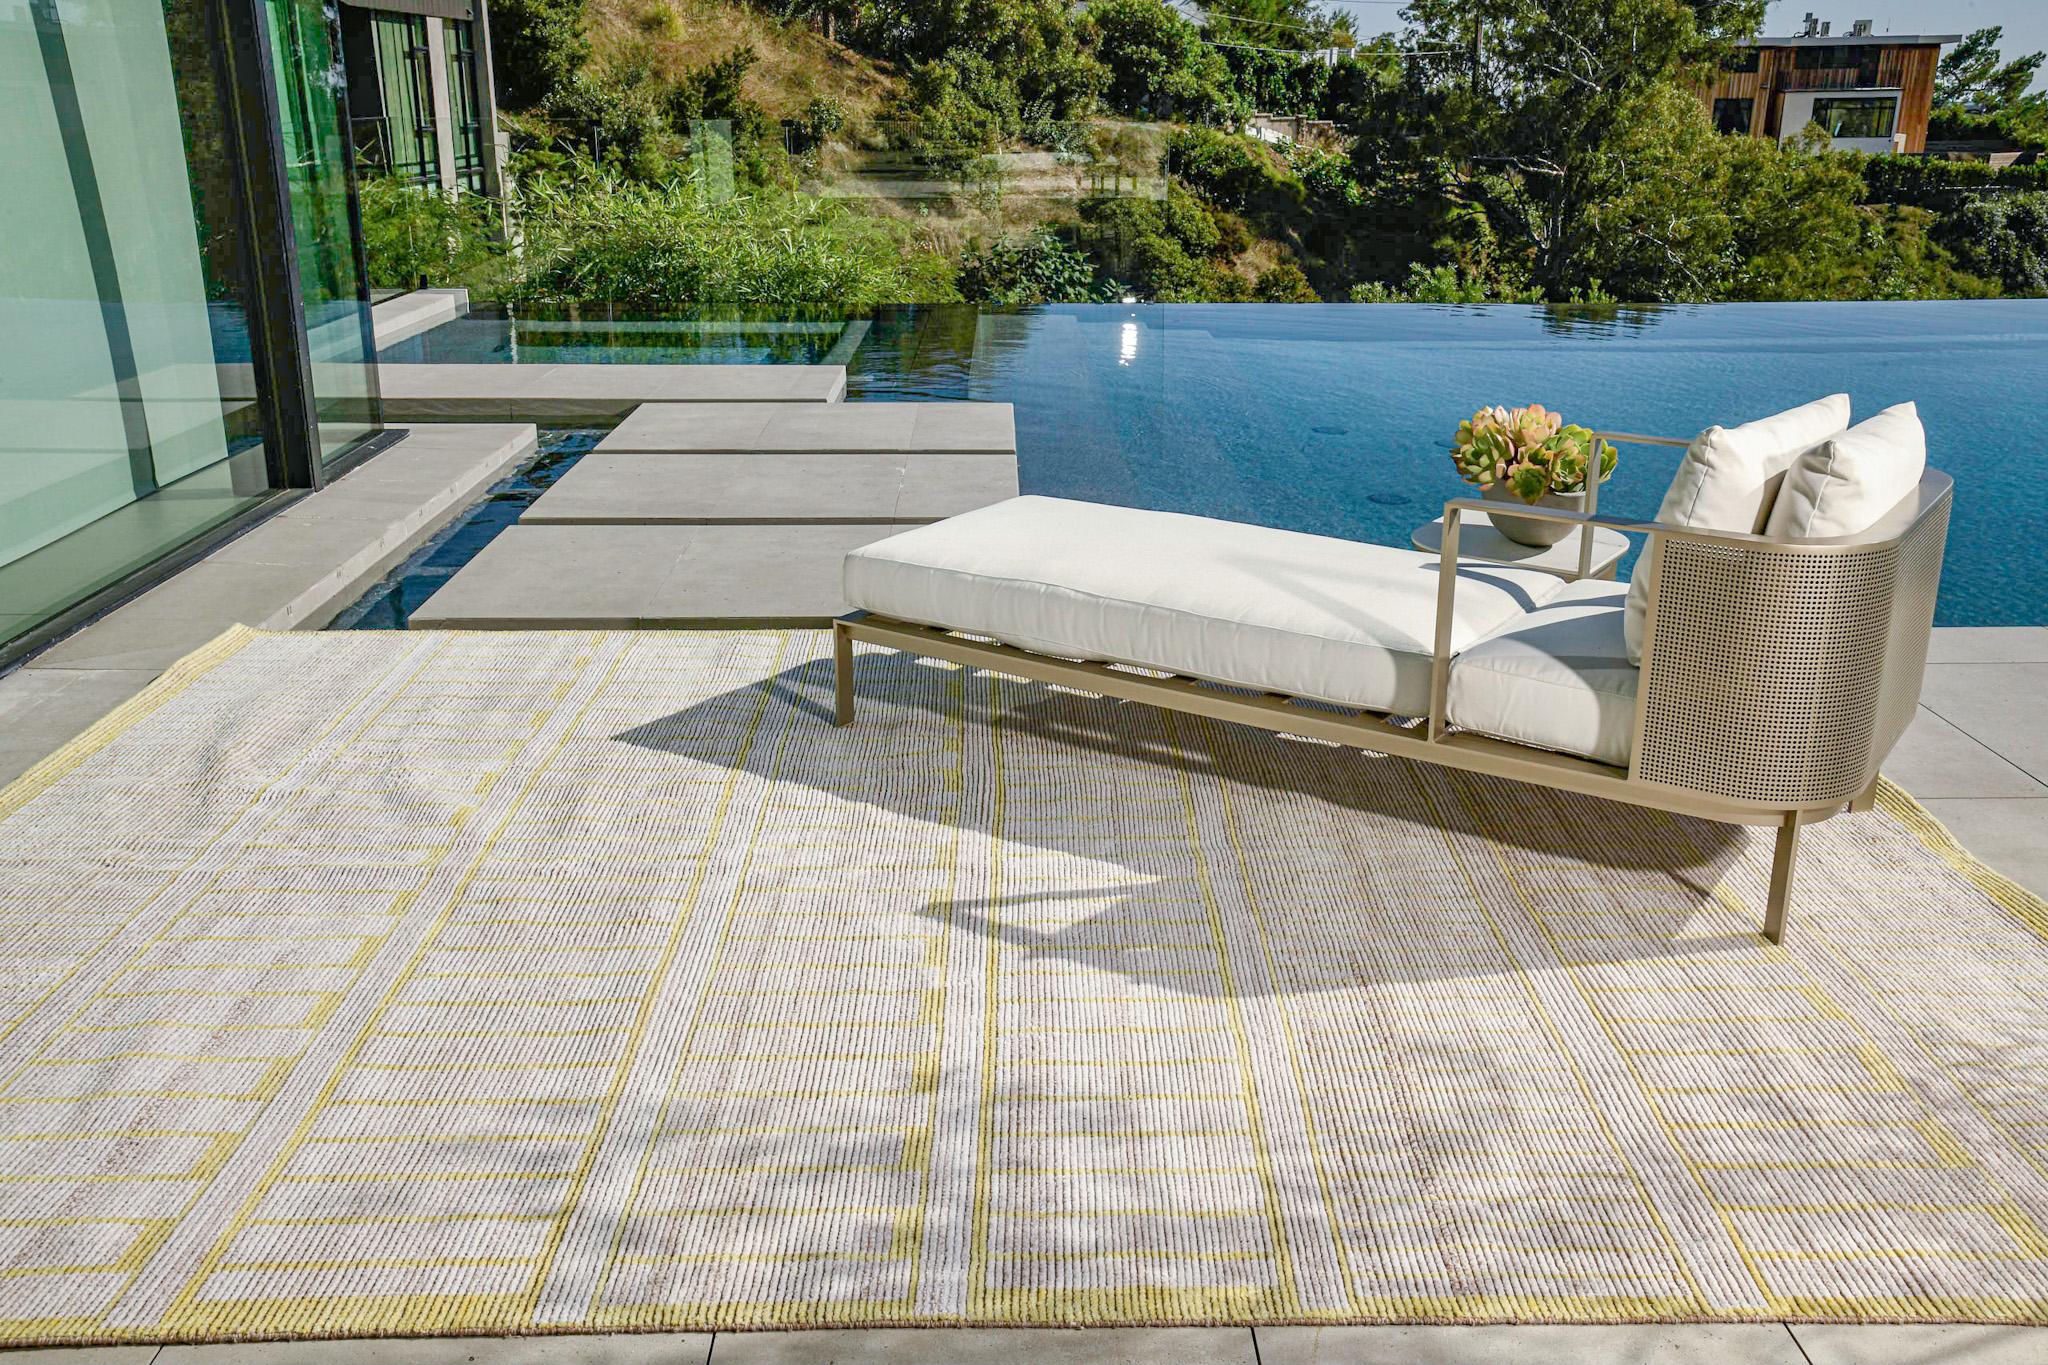 Enjoy the fresh air with Nasim, rugs that work indoors and out.

Rug Number
31426
Size
9' 1